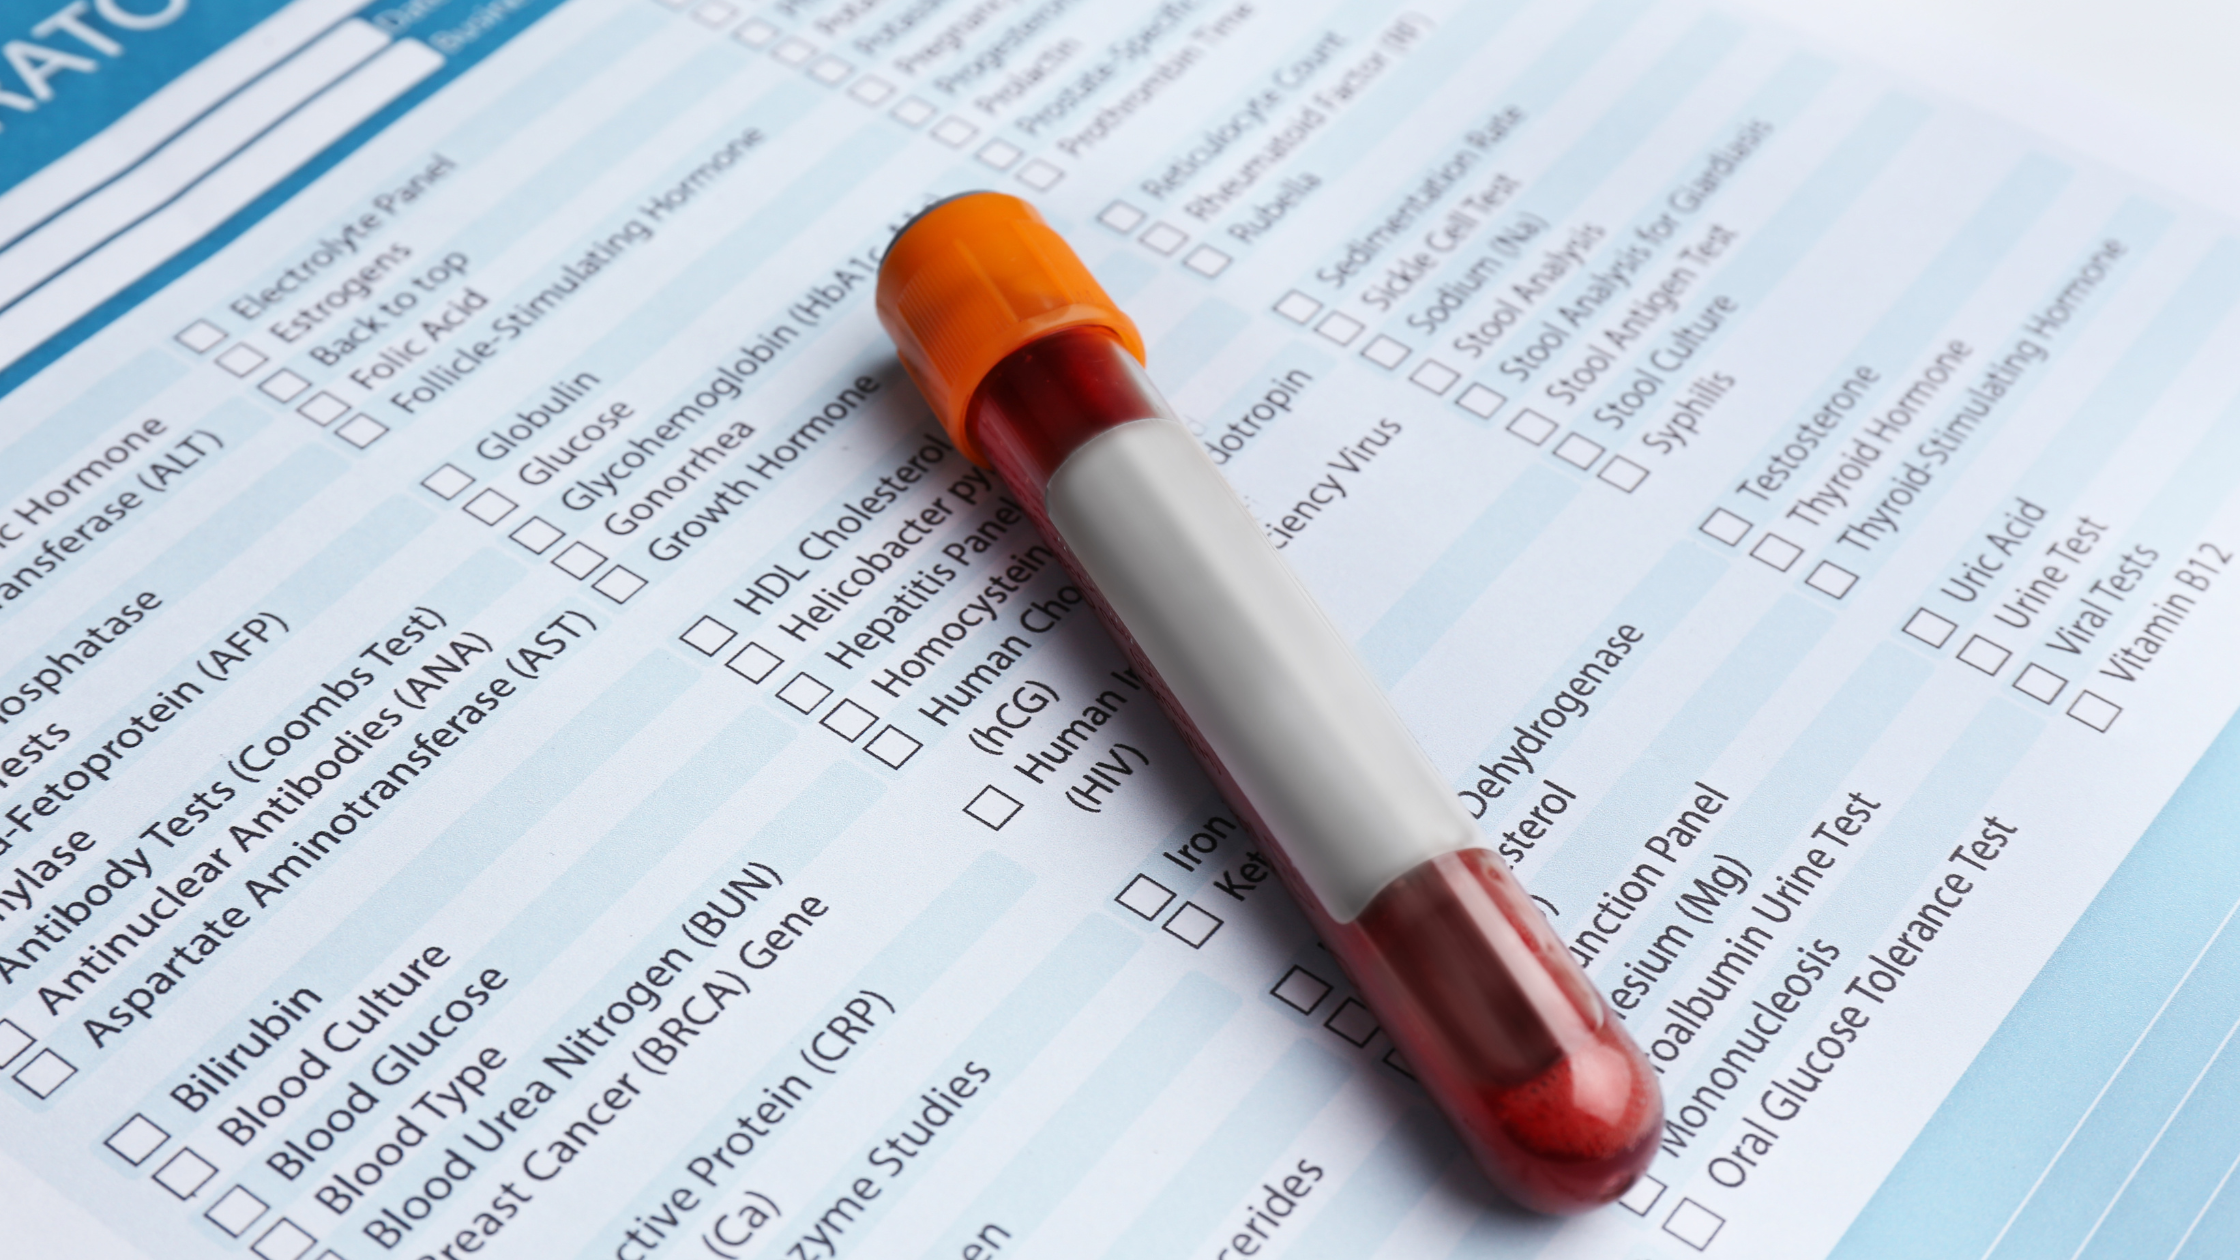 blood vial sitting on a check list of potential conditions to test for